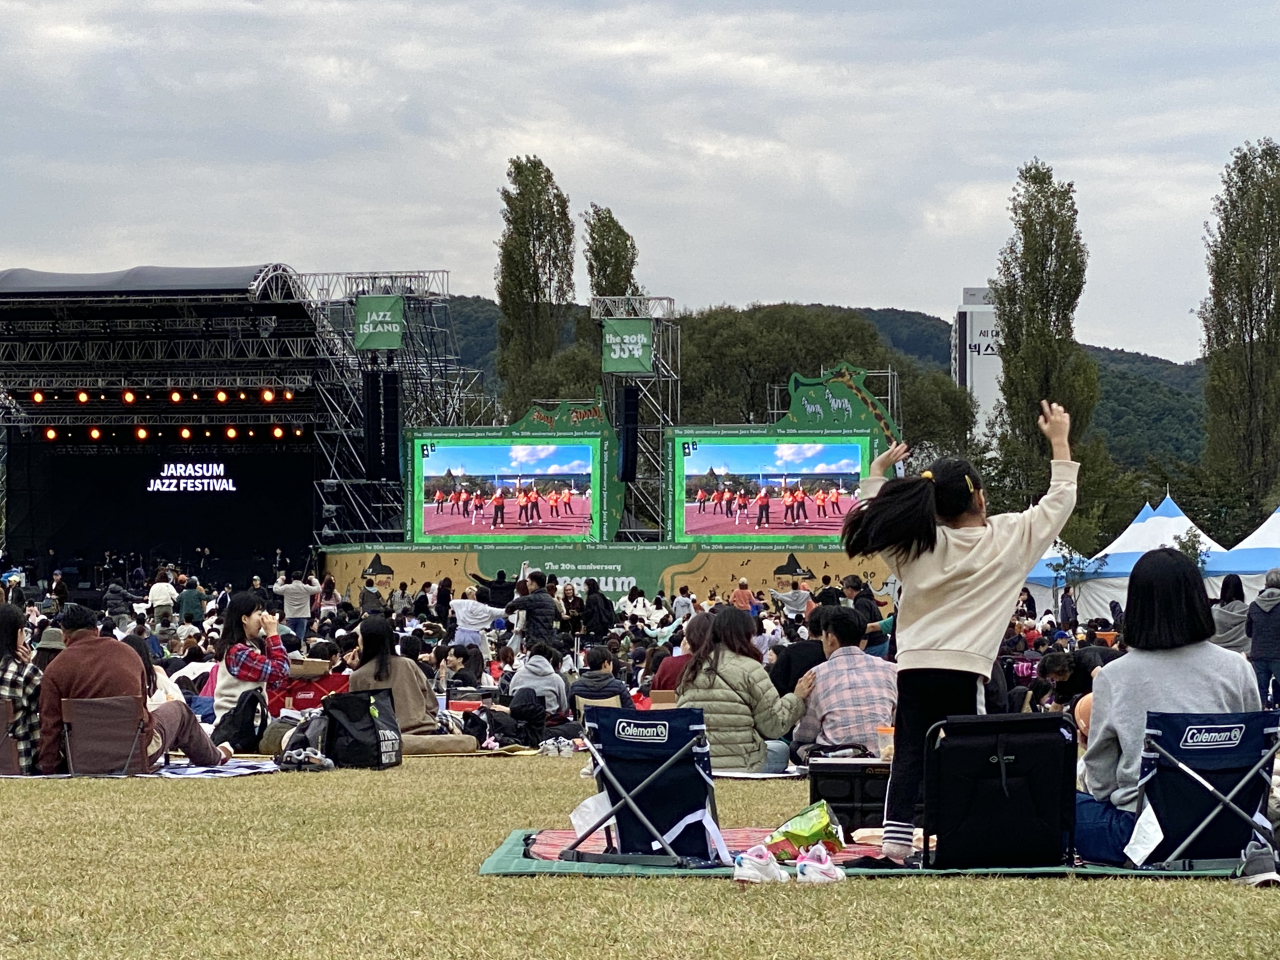 The audience watches the stage at the 20th Jarasum Jazz Festival, held on Jara Island in Gyeonggi Province, on Sunday. (Hwang Joo-young/The Korea Herald)